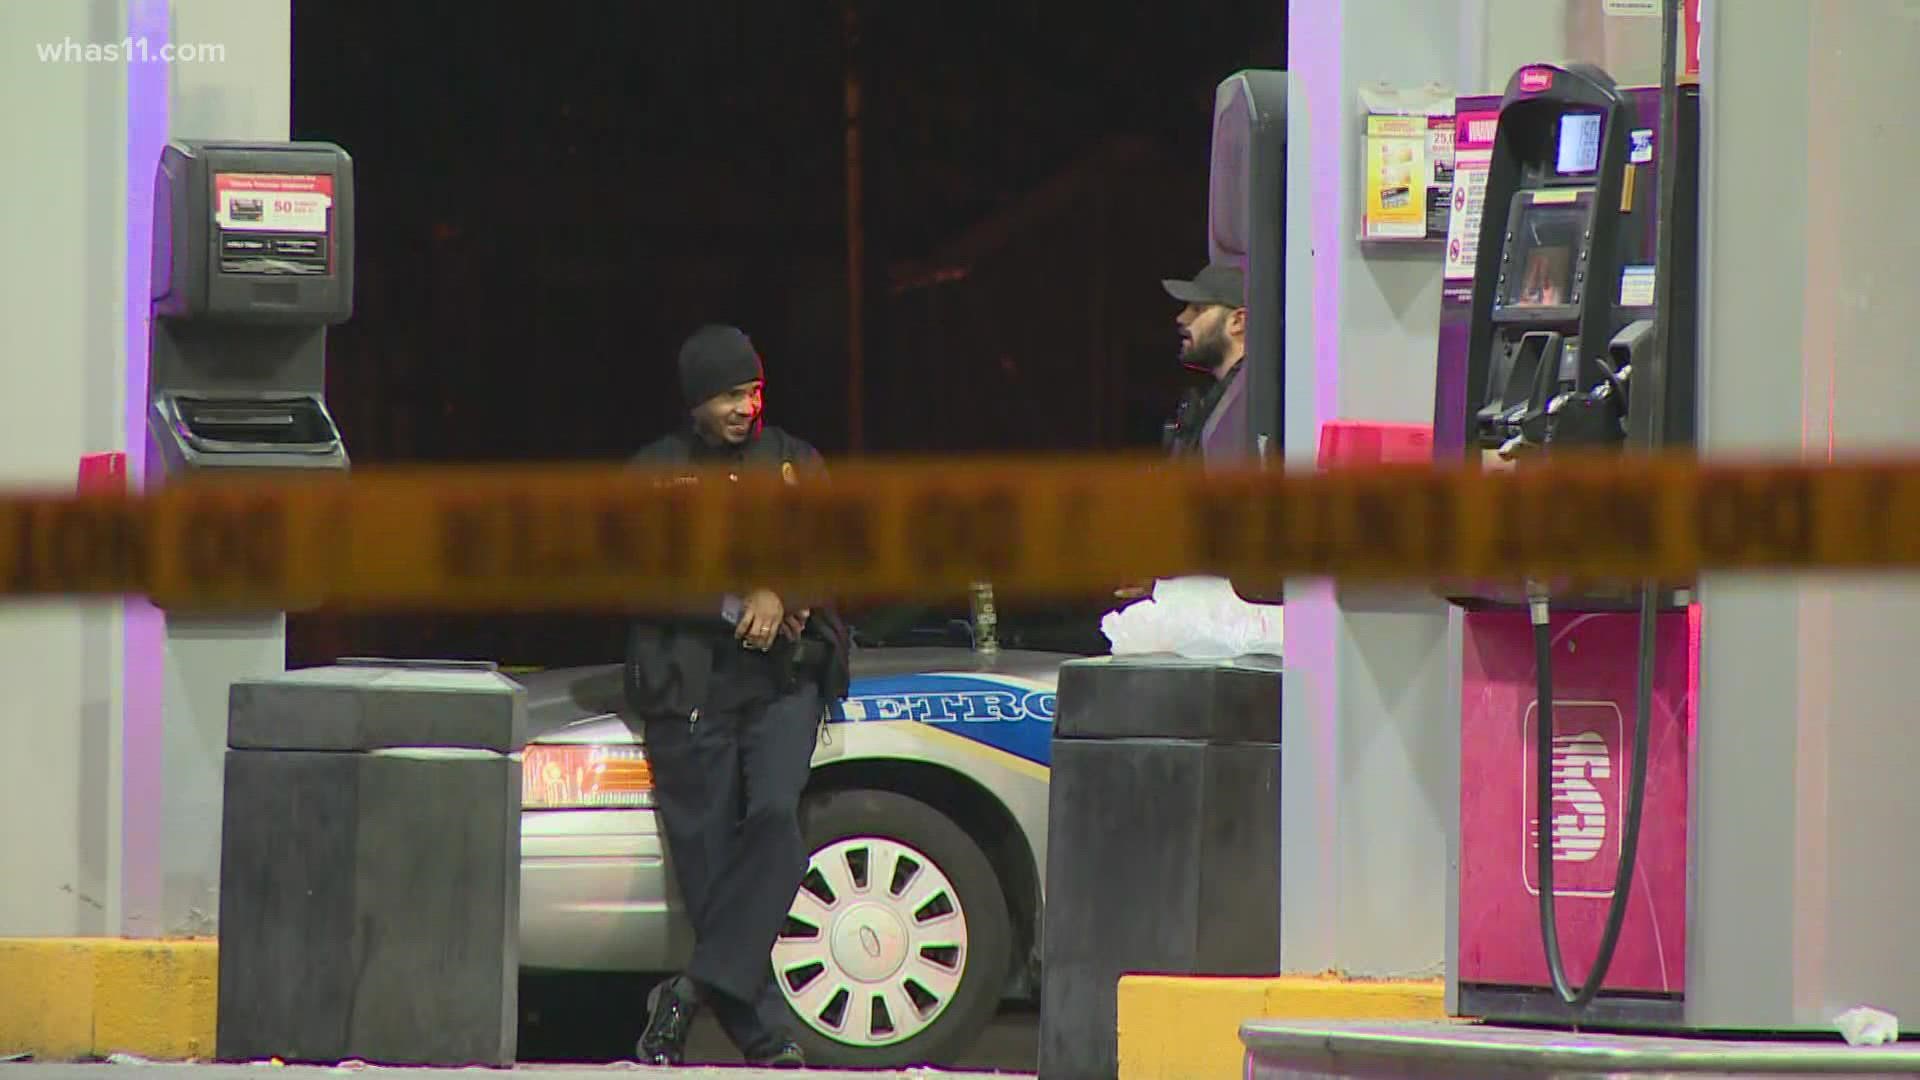 The coroner said 29-year-old Ra'Shaun Griffin died after he was shot near a Speedway gas station at 22nd and Duncan Street late Saturday.